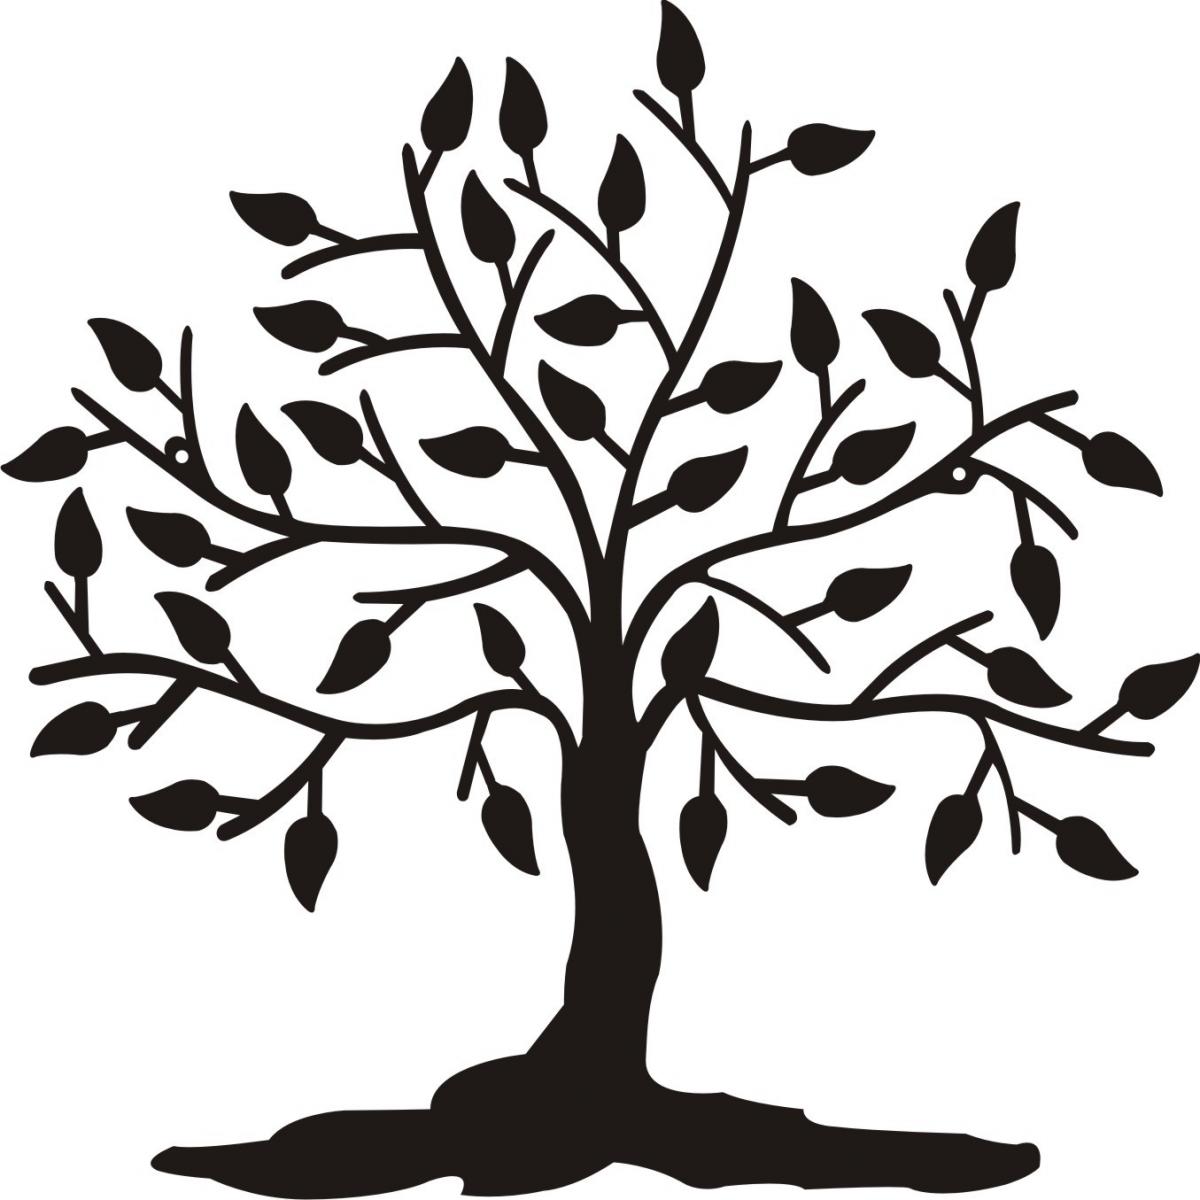 Tree of life black and white clipart